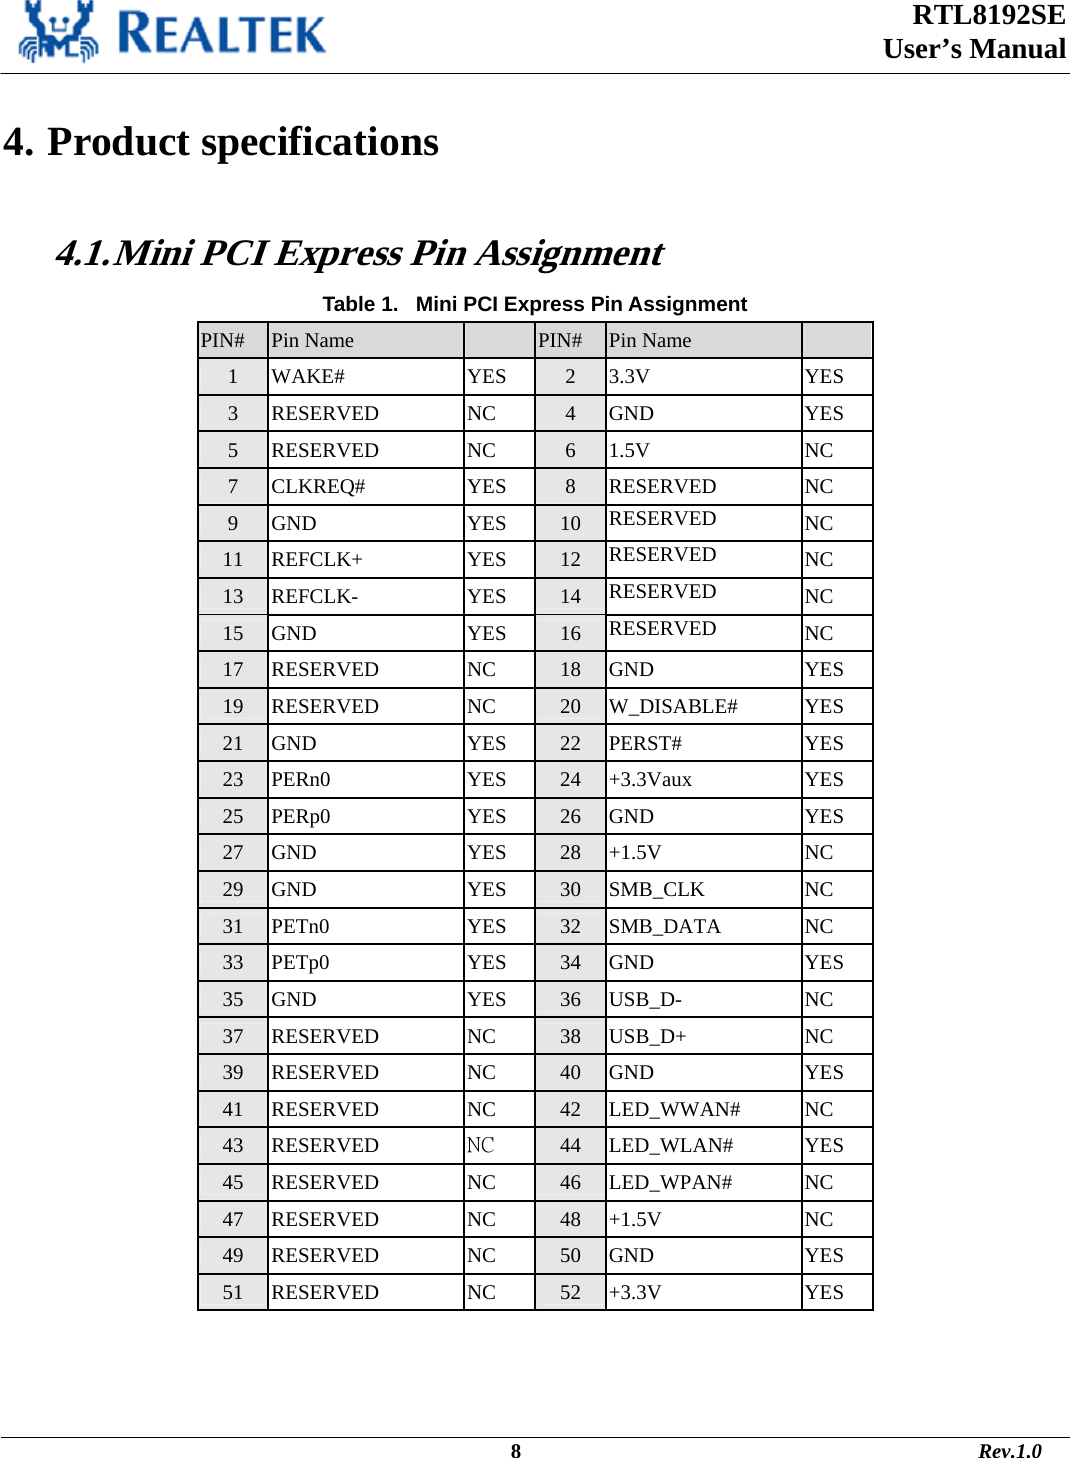  RTL8192SE  User’s Manual                                                                                             8                                                                                       Rev.1.0    4. Product specifications  4.1. Mini PCI Express Pin Assignment Table 1.   Mini PCI Express Pin Assignment PIN# Pin Name    PIN# Pin Name   1 WAKE# YES 2 3.3V YES 3 RESERVED NC 4 GND YES 5 RESERVED NC 6 1.5V NC 7 CLKREQ# YES 8 RESERVED NC 9 GND YES 10 RESERVED  NC 11 REFCLK+ YES 12 RESERVED  NC 13 REFCLK- YES 14 RESERVED  NC 15 GND YES 16 RESERVED  NC 17 RESERVED NC 18 GND YES 19 RESERVED NC 20 W_DISABLE# YES 21 GND YES 22 PERST# YES 23 PERn0 YES 24 +3.3Vaux YES 25 PERp0 YES 26 GND YES 27 GND YES 28 +1.5V NC 29 GND YES 30 SMB_CLK NC 31 PETn0 YES 32 SMB_DATA NC 33 PETp0 YES 34 GND YES 35 GND YES 36 USB_D- NC 37 RESERVED NC 38 USB_D+ NC 39 RESERVED NC 40 GND YES 41 RESERVED NC 42 LED_WWAN# NC 43 RESERVED NC  44 LED_WLAN# YES 45 RESERVED NC 46 LED_WPAN# NC 47 RESERVED NC 48 +1.5V NC 49 RESERVED NC 50 GND YES 51 RESERVED NC 52 +3.3V YES  